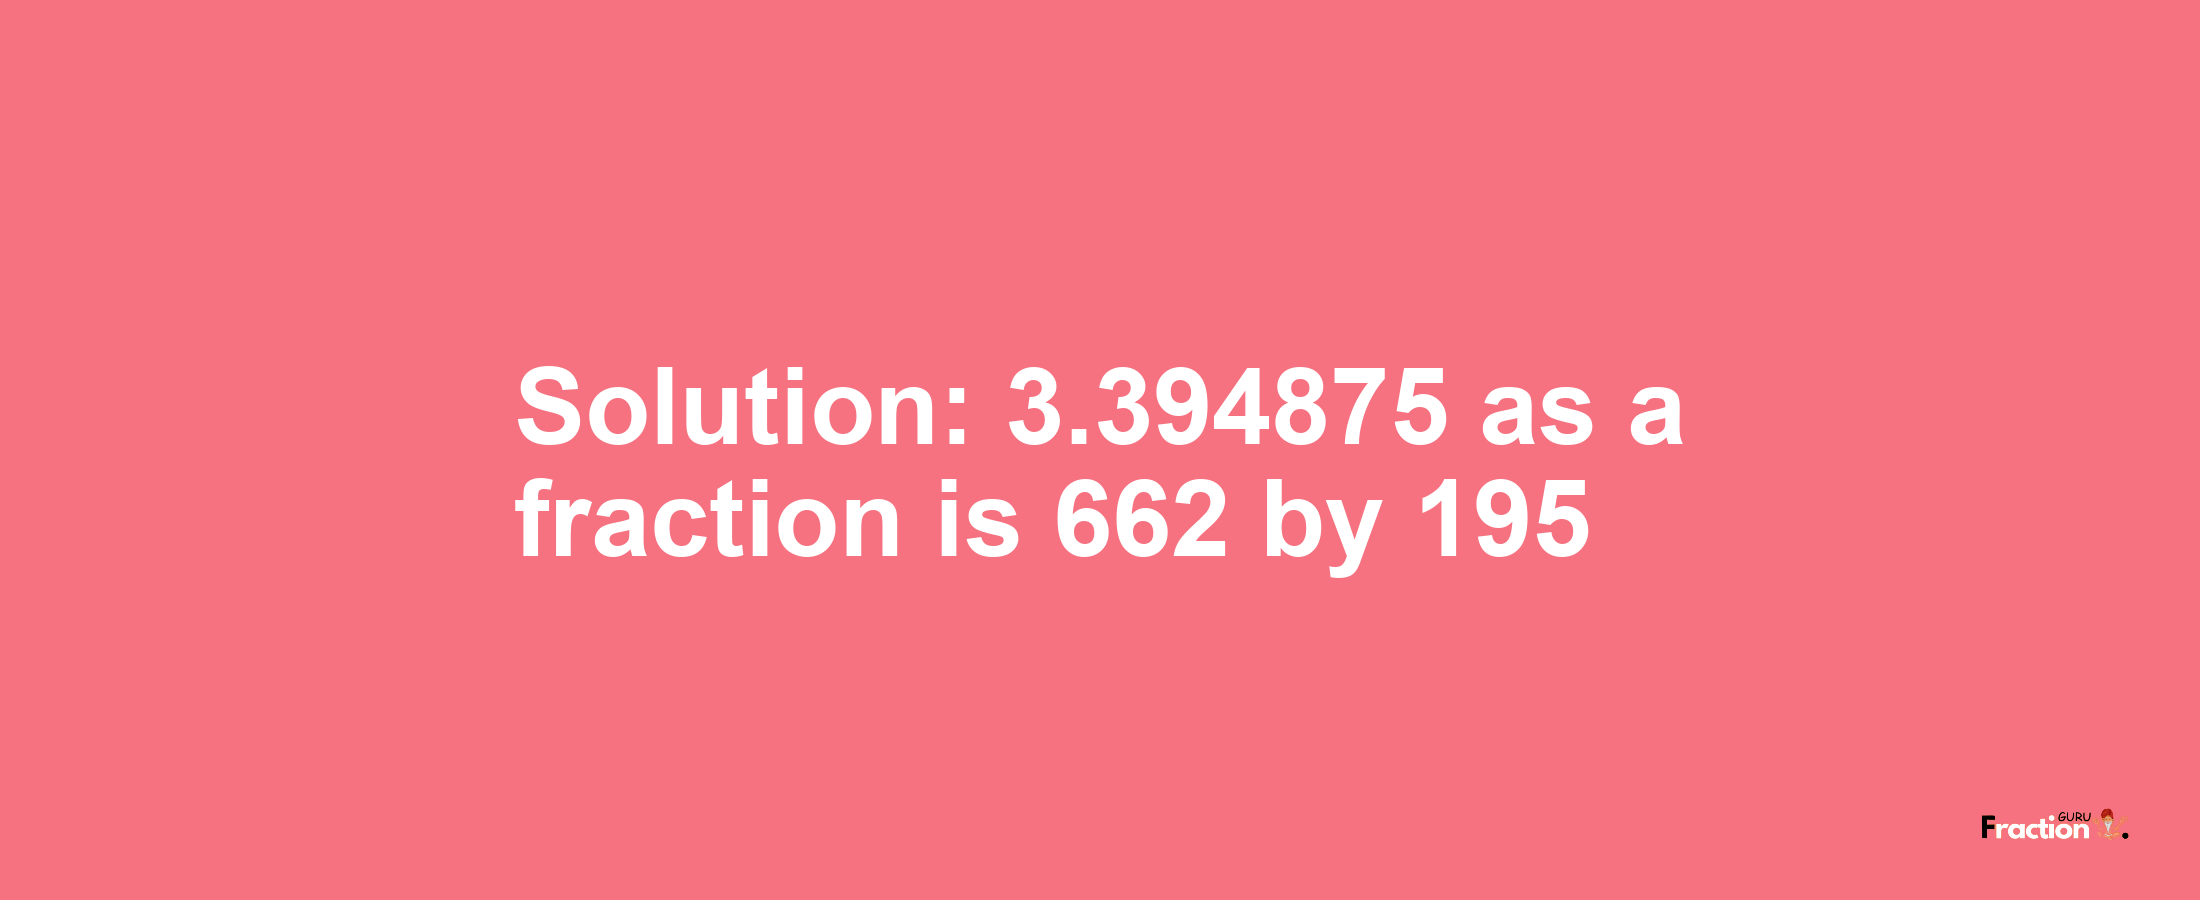 Solution:3.394875 as a fraction is 662/195